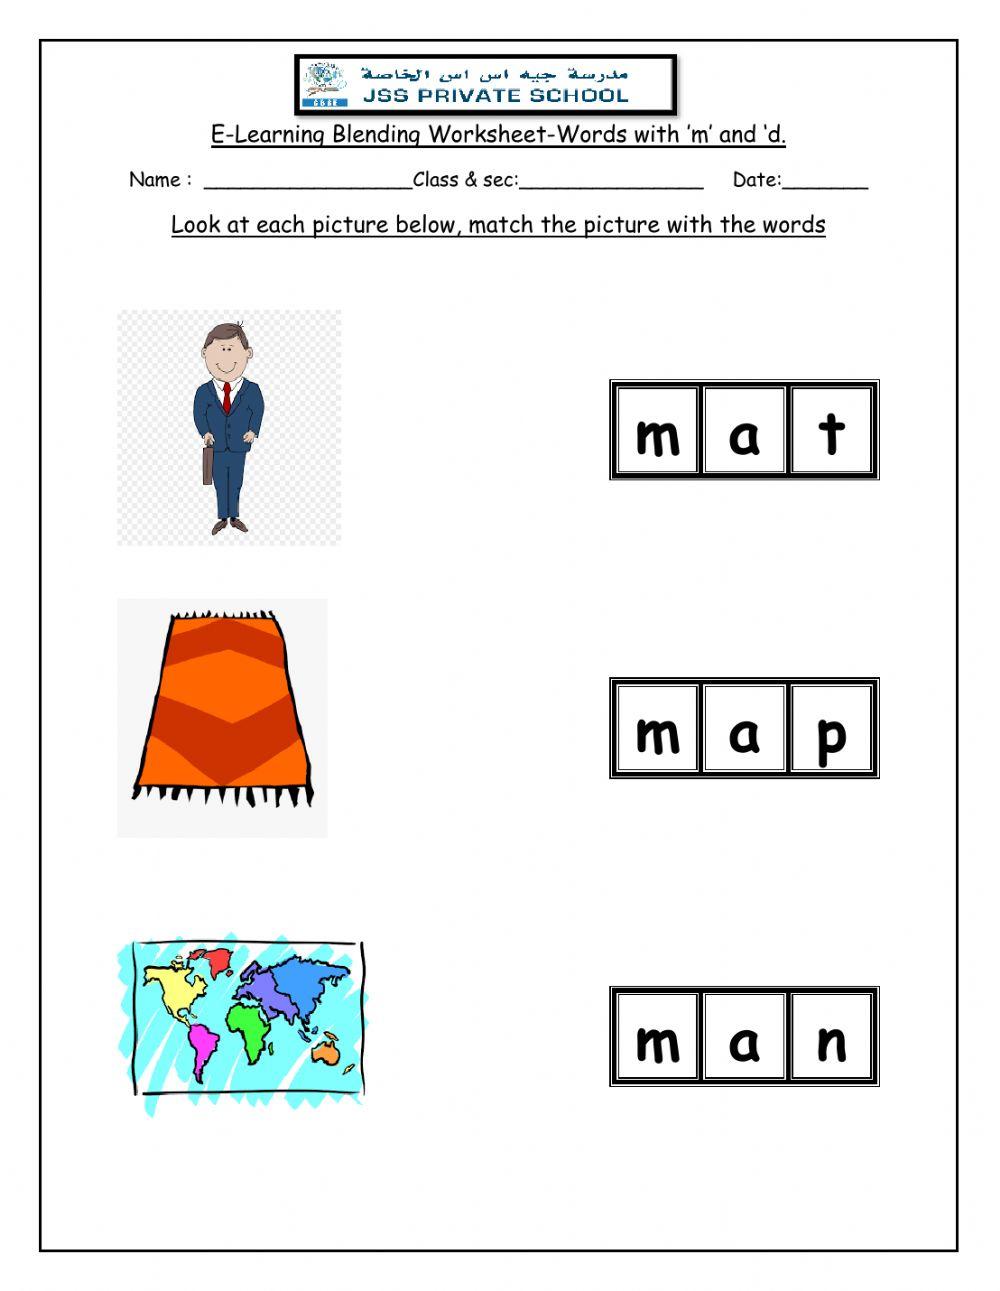 S,a,t,p practice work sheet other link